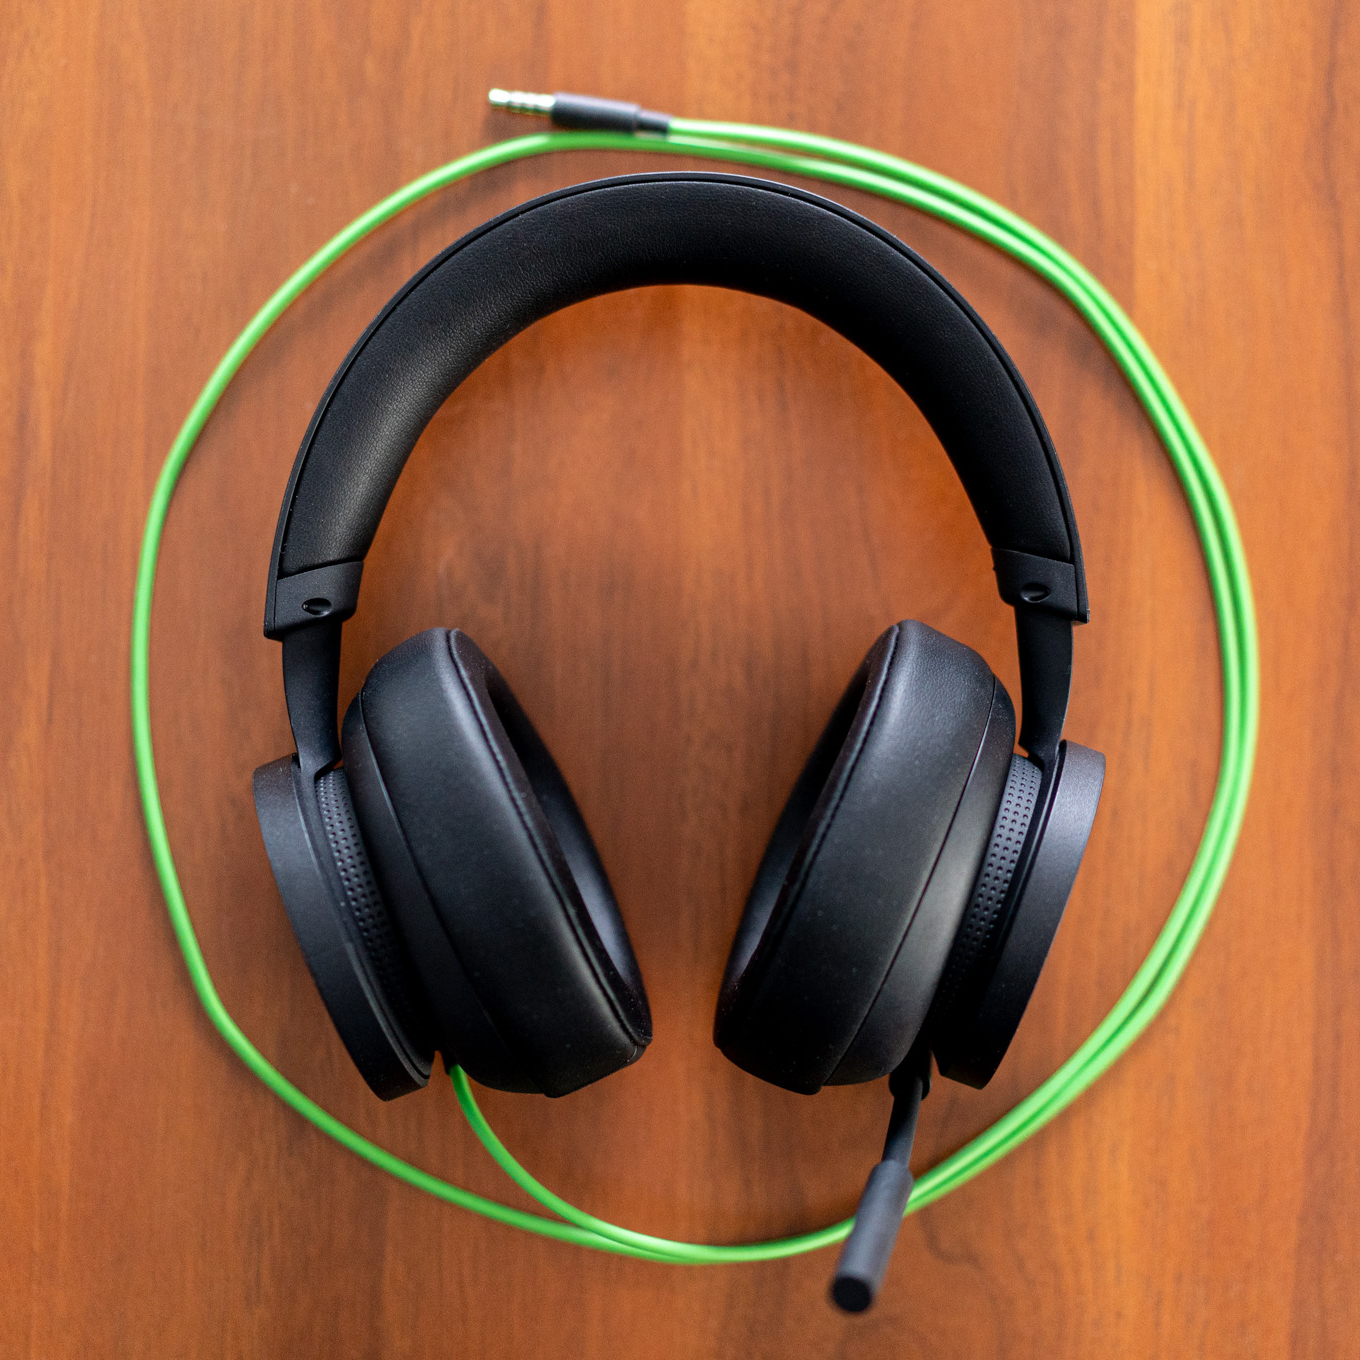 lucht AIDS Behoren Xbox Stereo Headset review: affordable, wired, and works well - The Verge